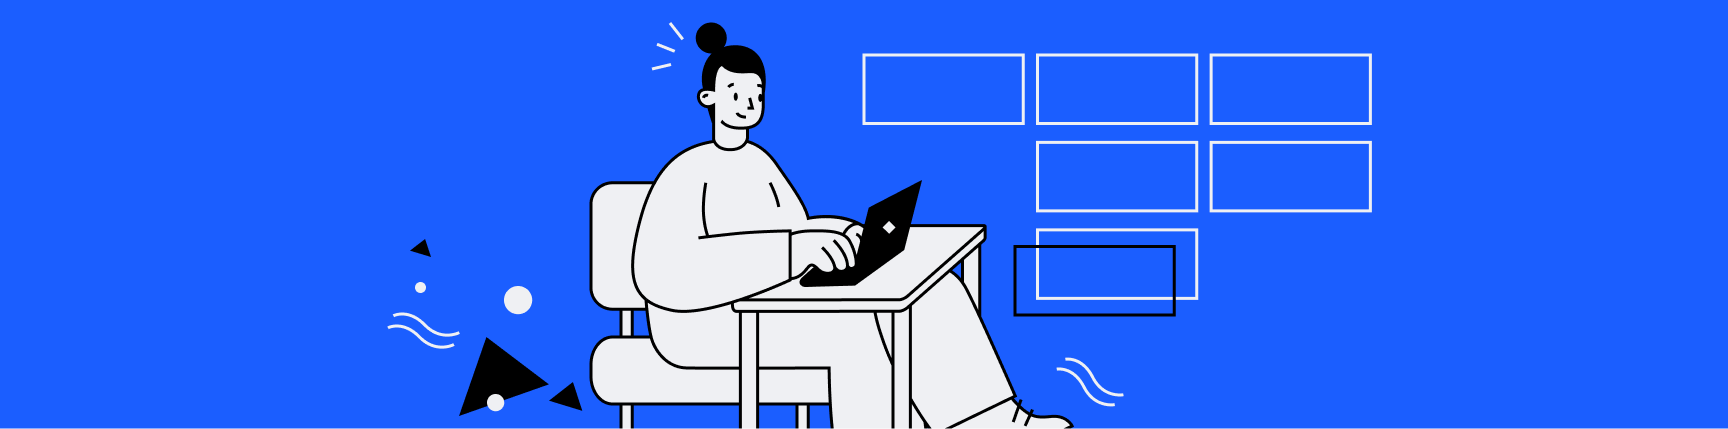 Woman smiling and typing on a laptop on a blue background with a project management grid to her right